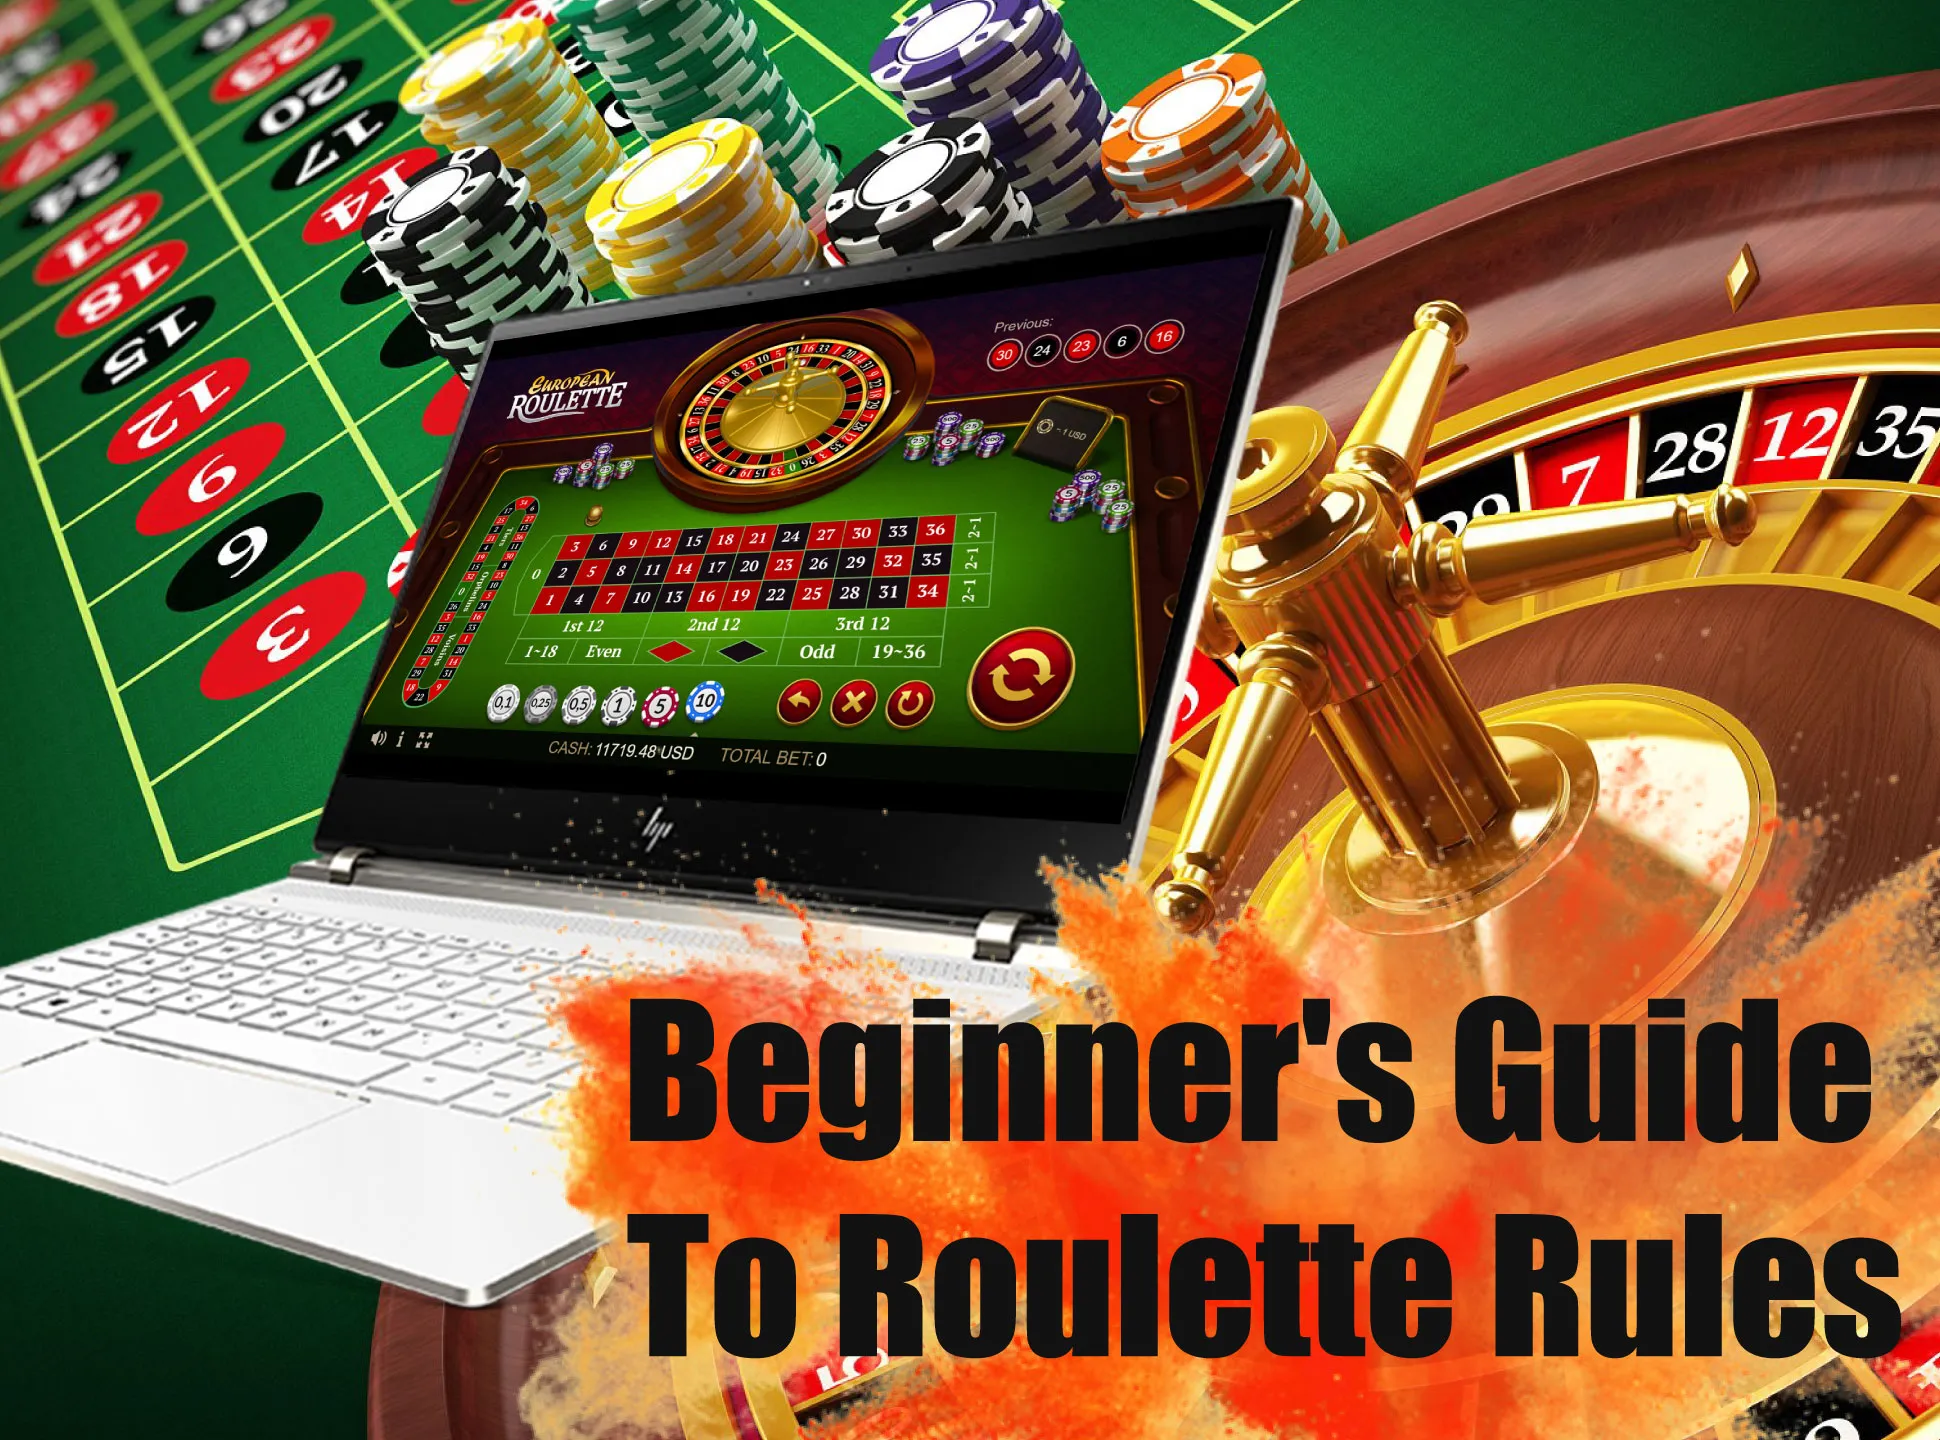 Read this information if you are new to the roulette playing.